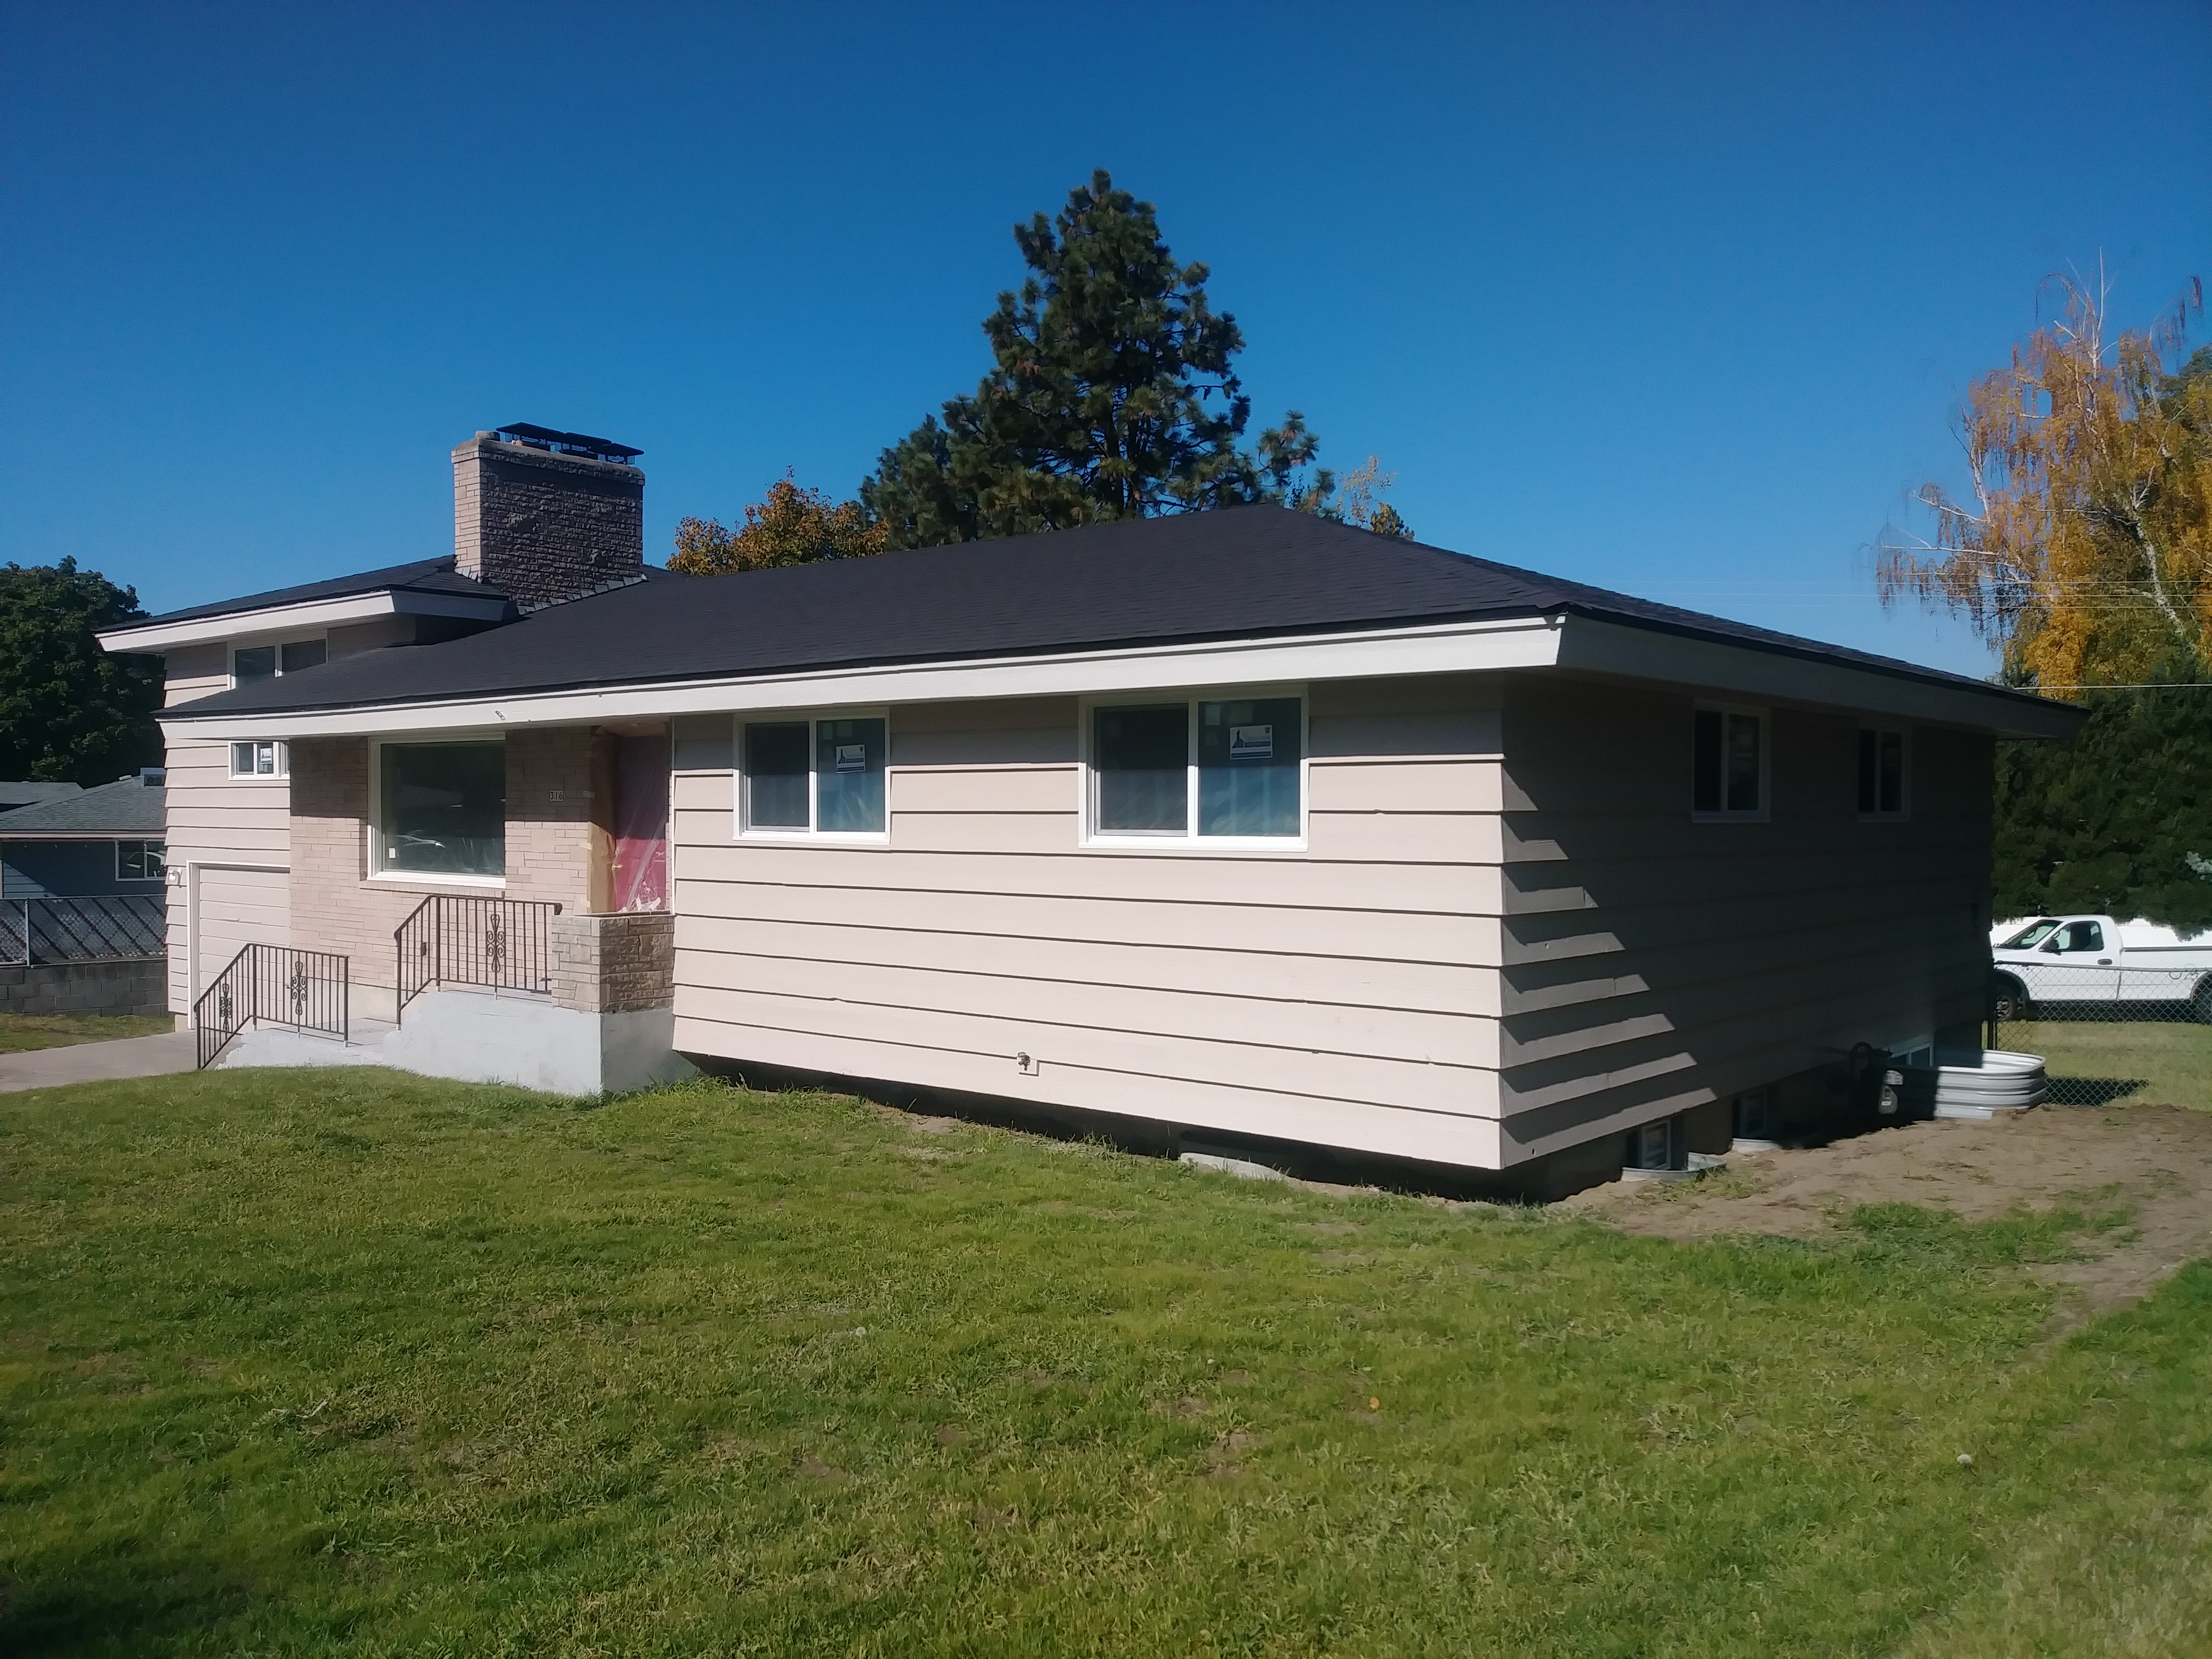 Exterior wood siding after painting